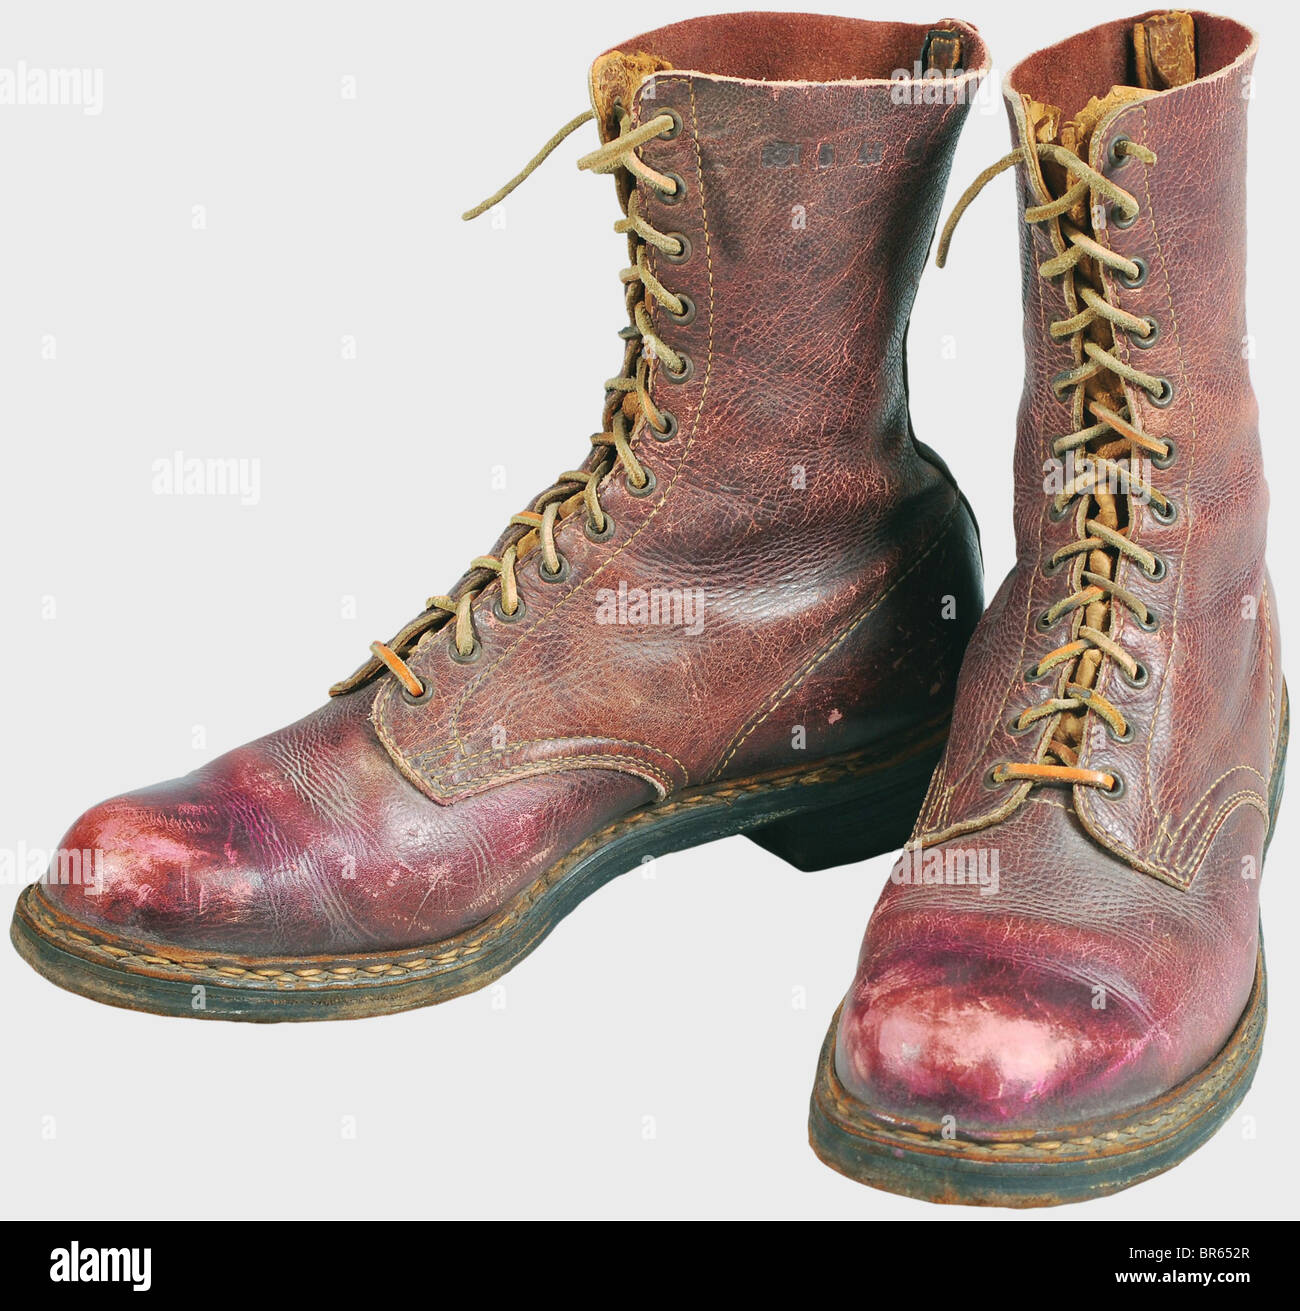 A pair of paratrooper boots, reddish leather with twelve pairs of lace eyelets on the front and a buckskin tongue, Leather laces. The legs are stamped '31 or '32 5 44 88' respectively. Leather soles stamped '32 5', made to accept ski bindings and with iron plates. Clearly worn with signs of age. Very rare. historic, historical, 1910s, 20th century, Second World War / WWII, object, objects, clipping, cut out, cut-out, cut-outs, stills, military, militaria, Luftwaffe, German Air Force, branch of service, branches of service, armed service, armed services, utensil, Stock Photo